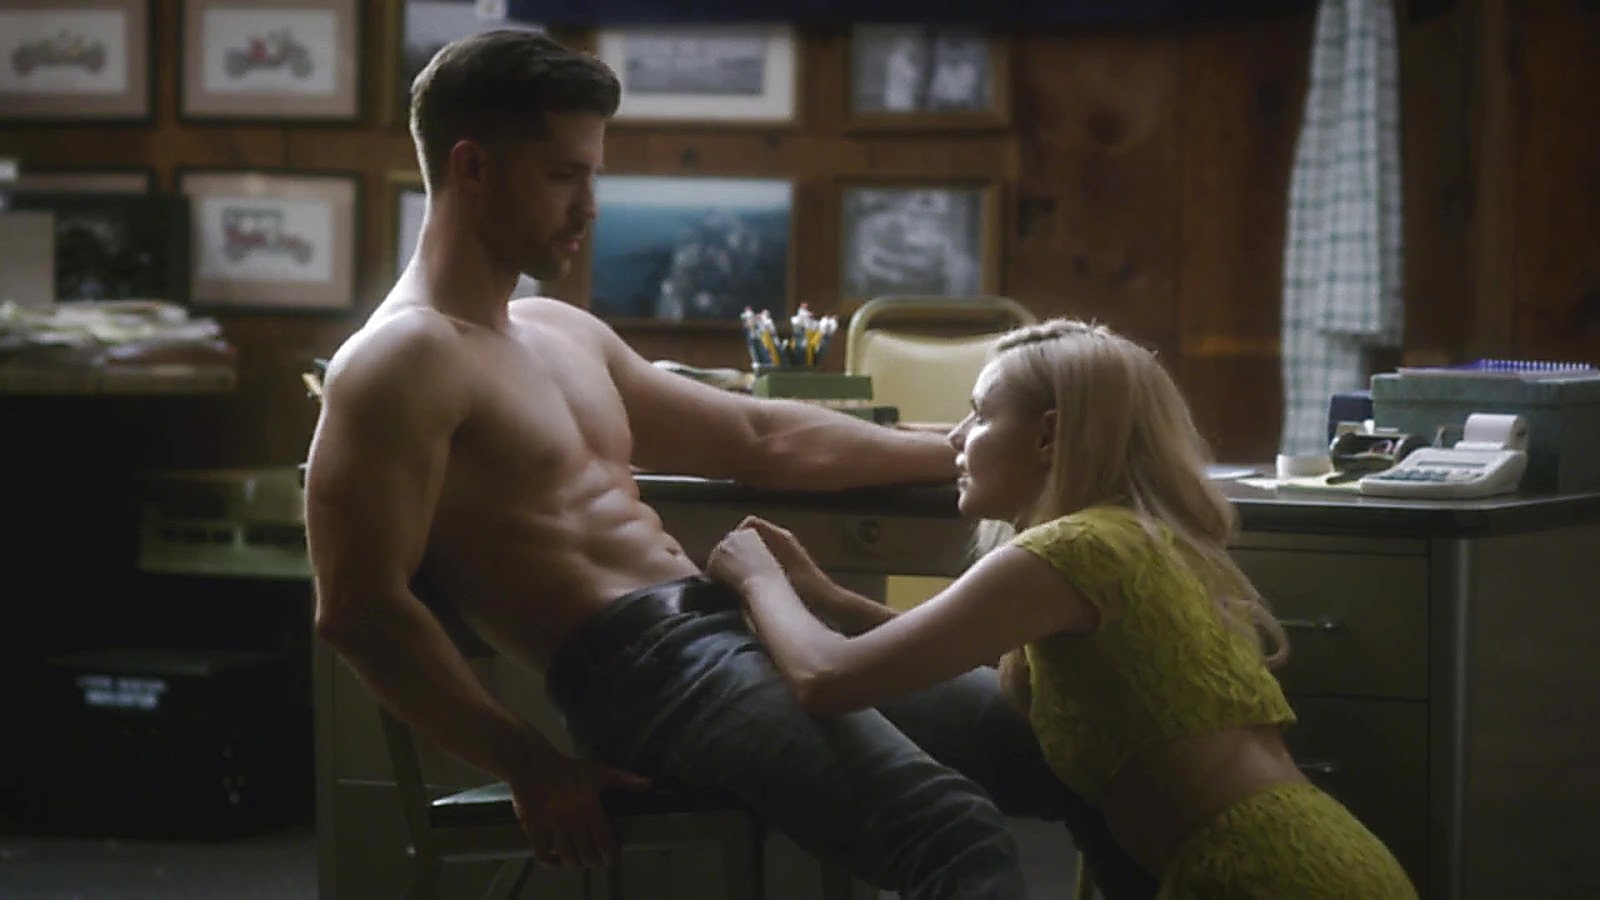 David A Gregory sexy shirtless scene June 2, 2020, 5am